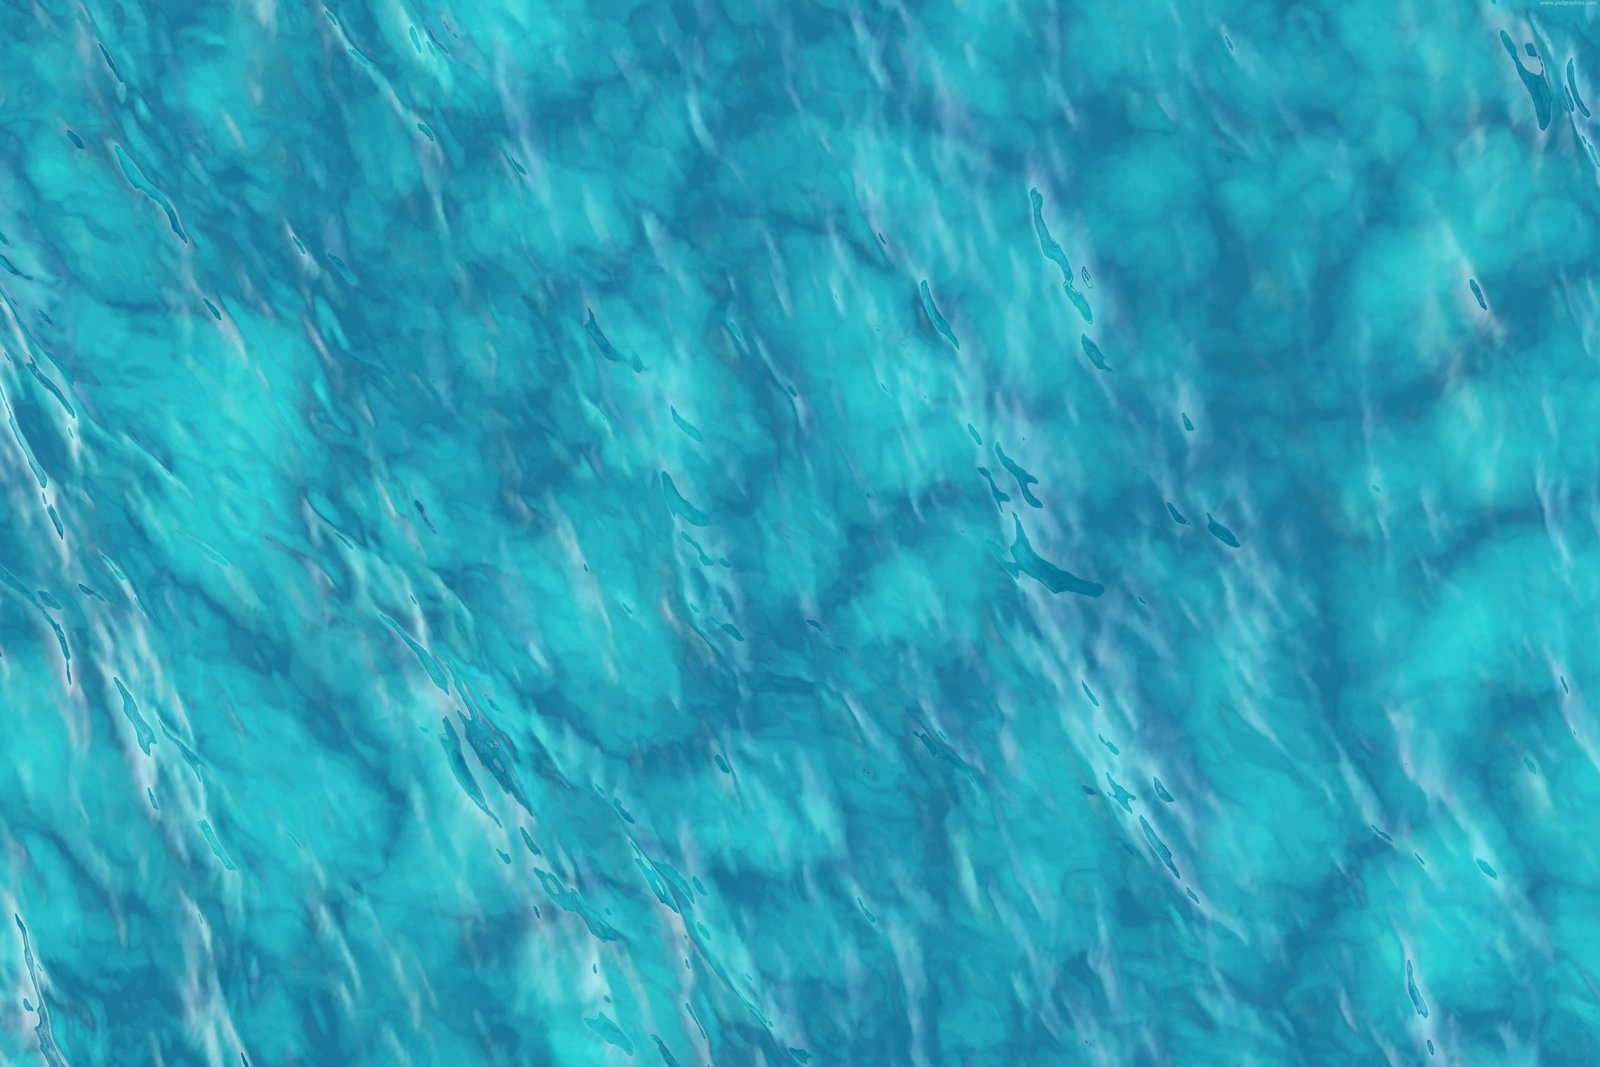 Turquoise Sea Water Background Psdgraphics